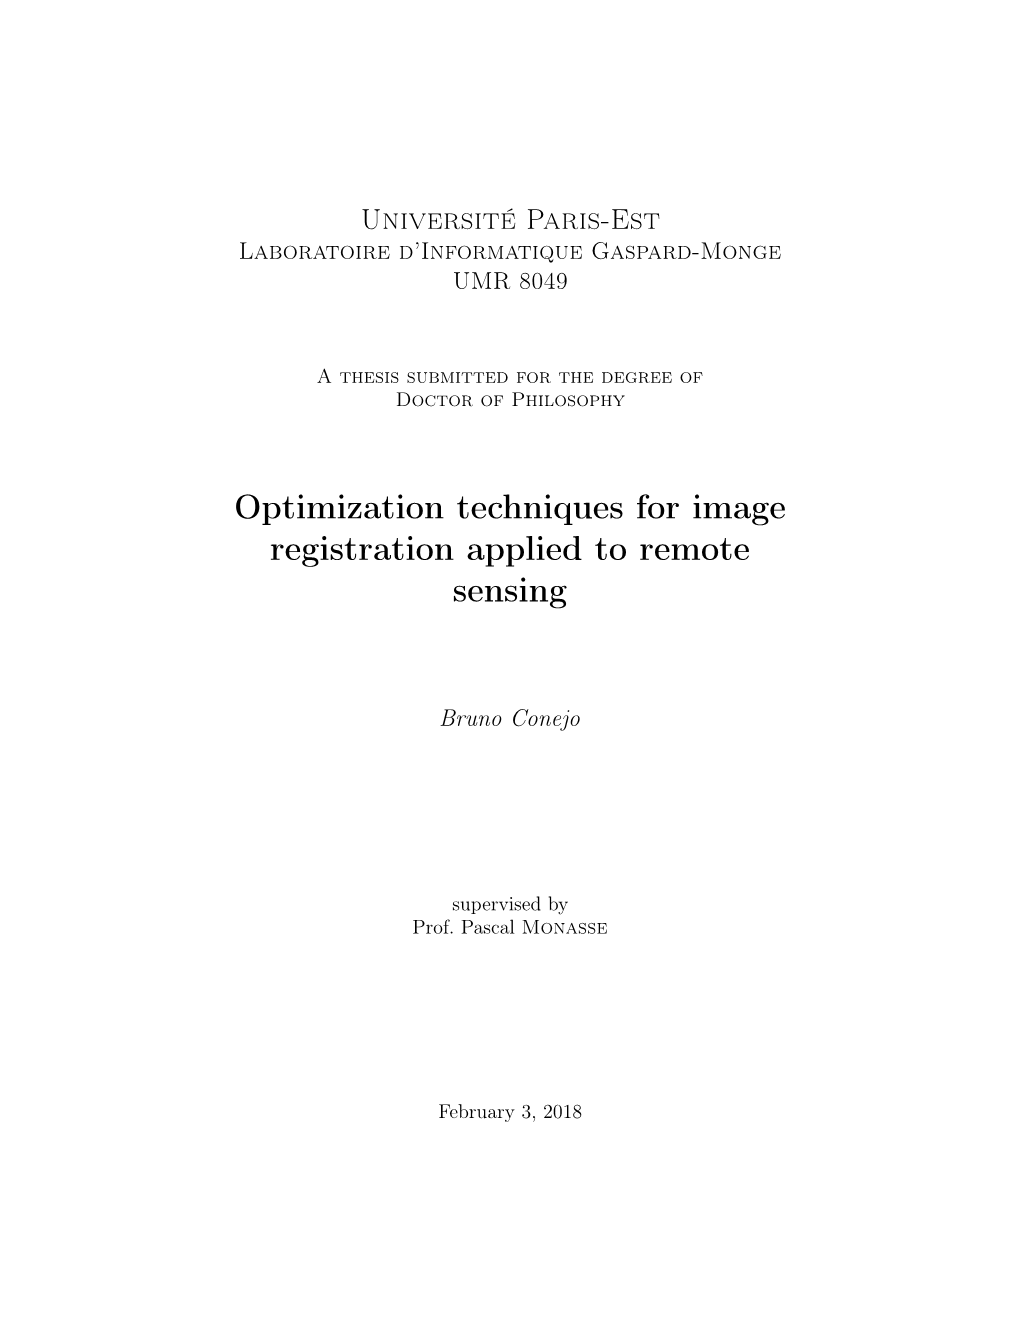 Optimization Techniques for Image Registration Applied to Remote Sensing